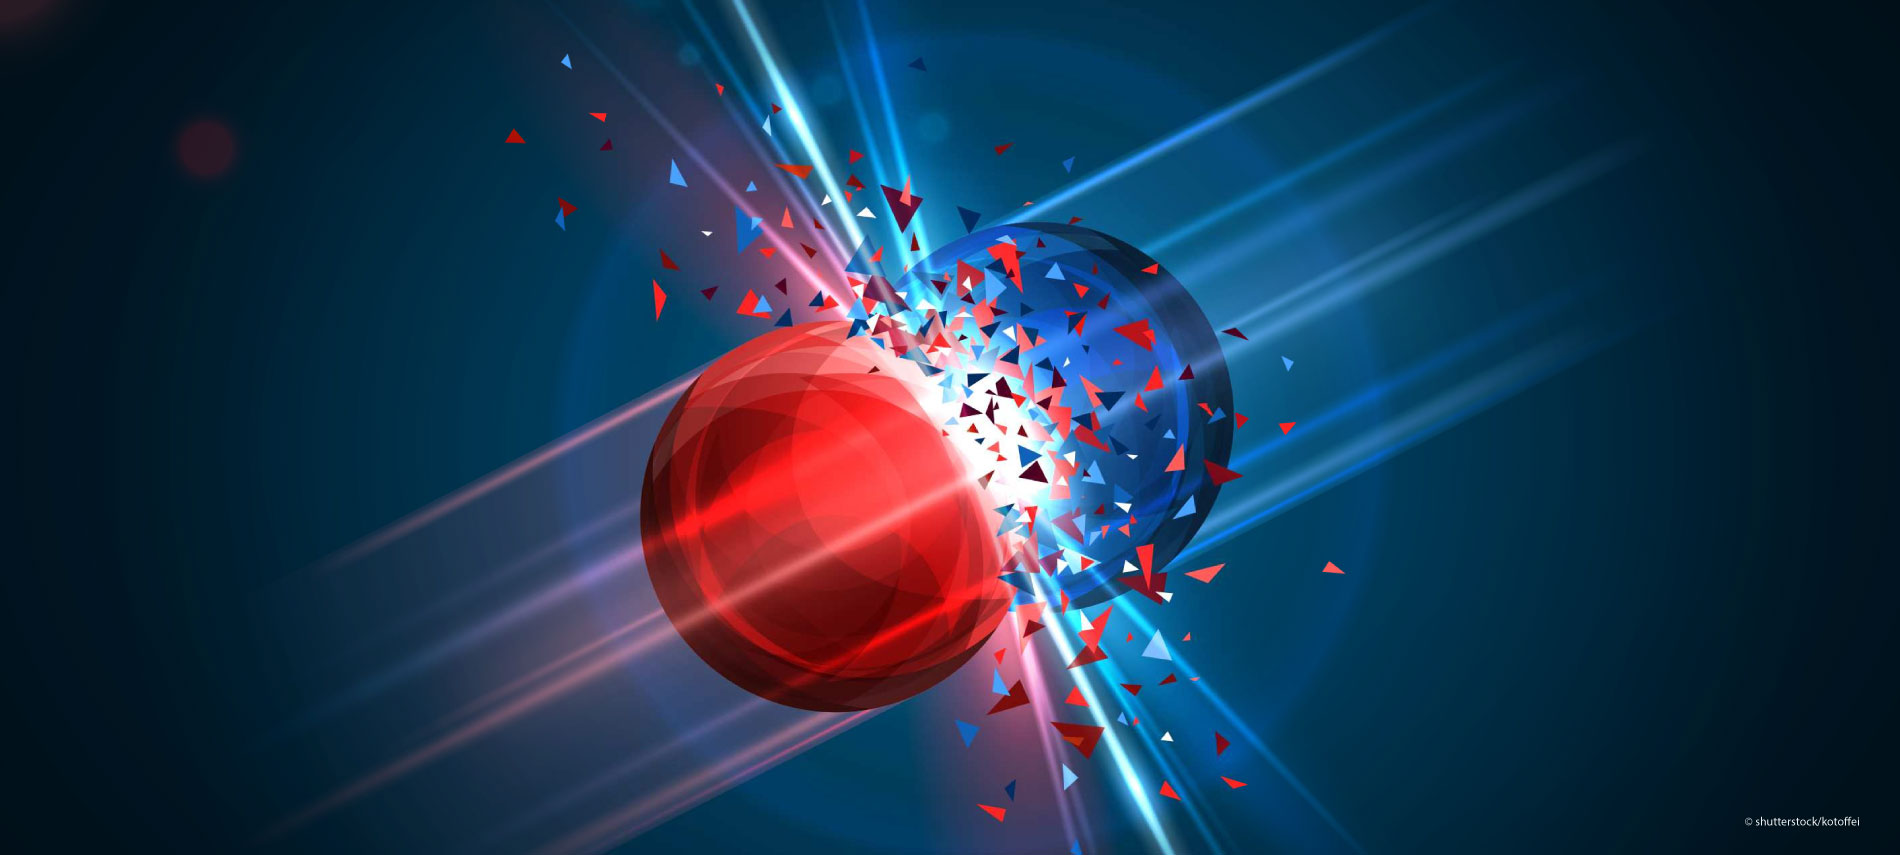 Red and blue particles collision. Vector illustration. Atom fusion, explosion concept. Abstract molecules impact. Atomic energy power blast, electrons protons collide.